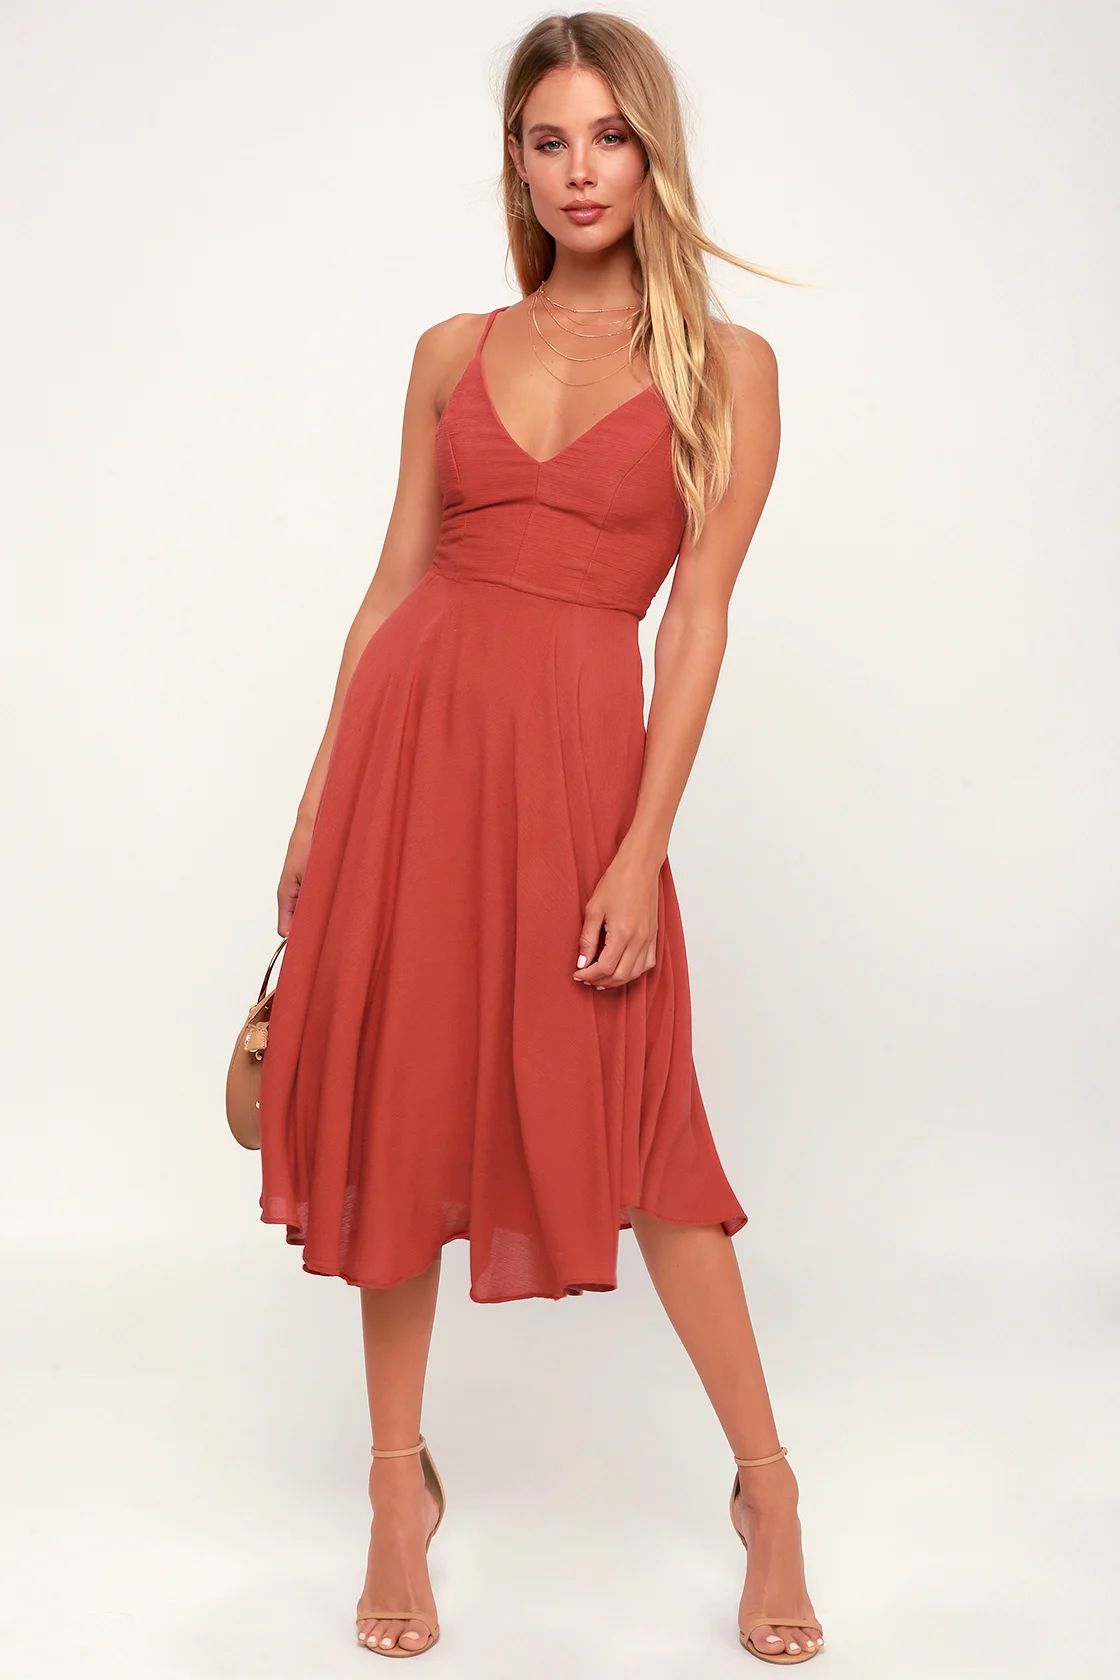 Troulos Rust Red Lace-Up Midi Dress | Lulus (US)